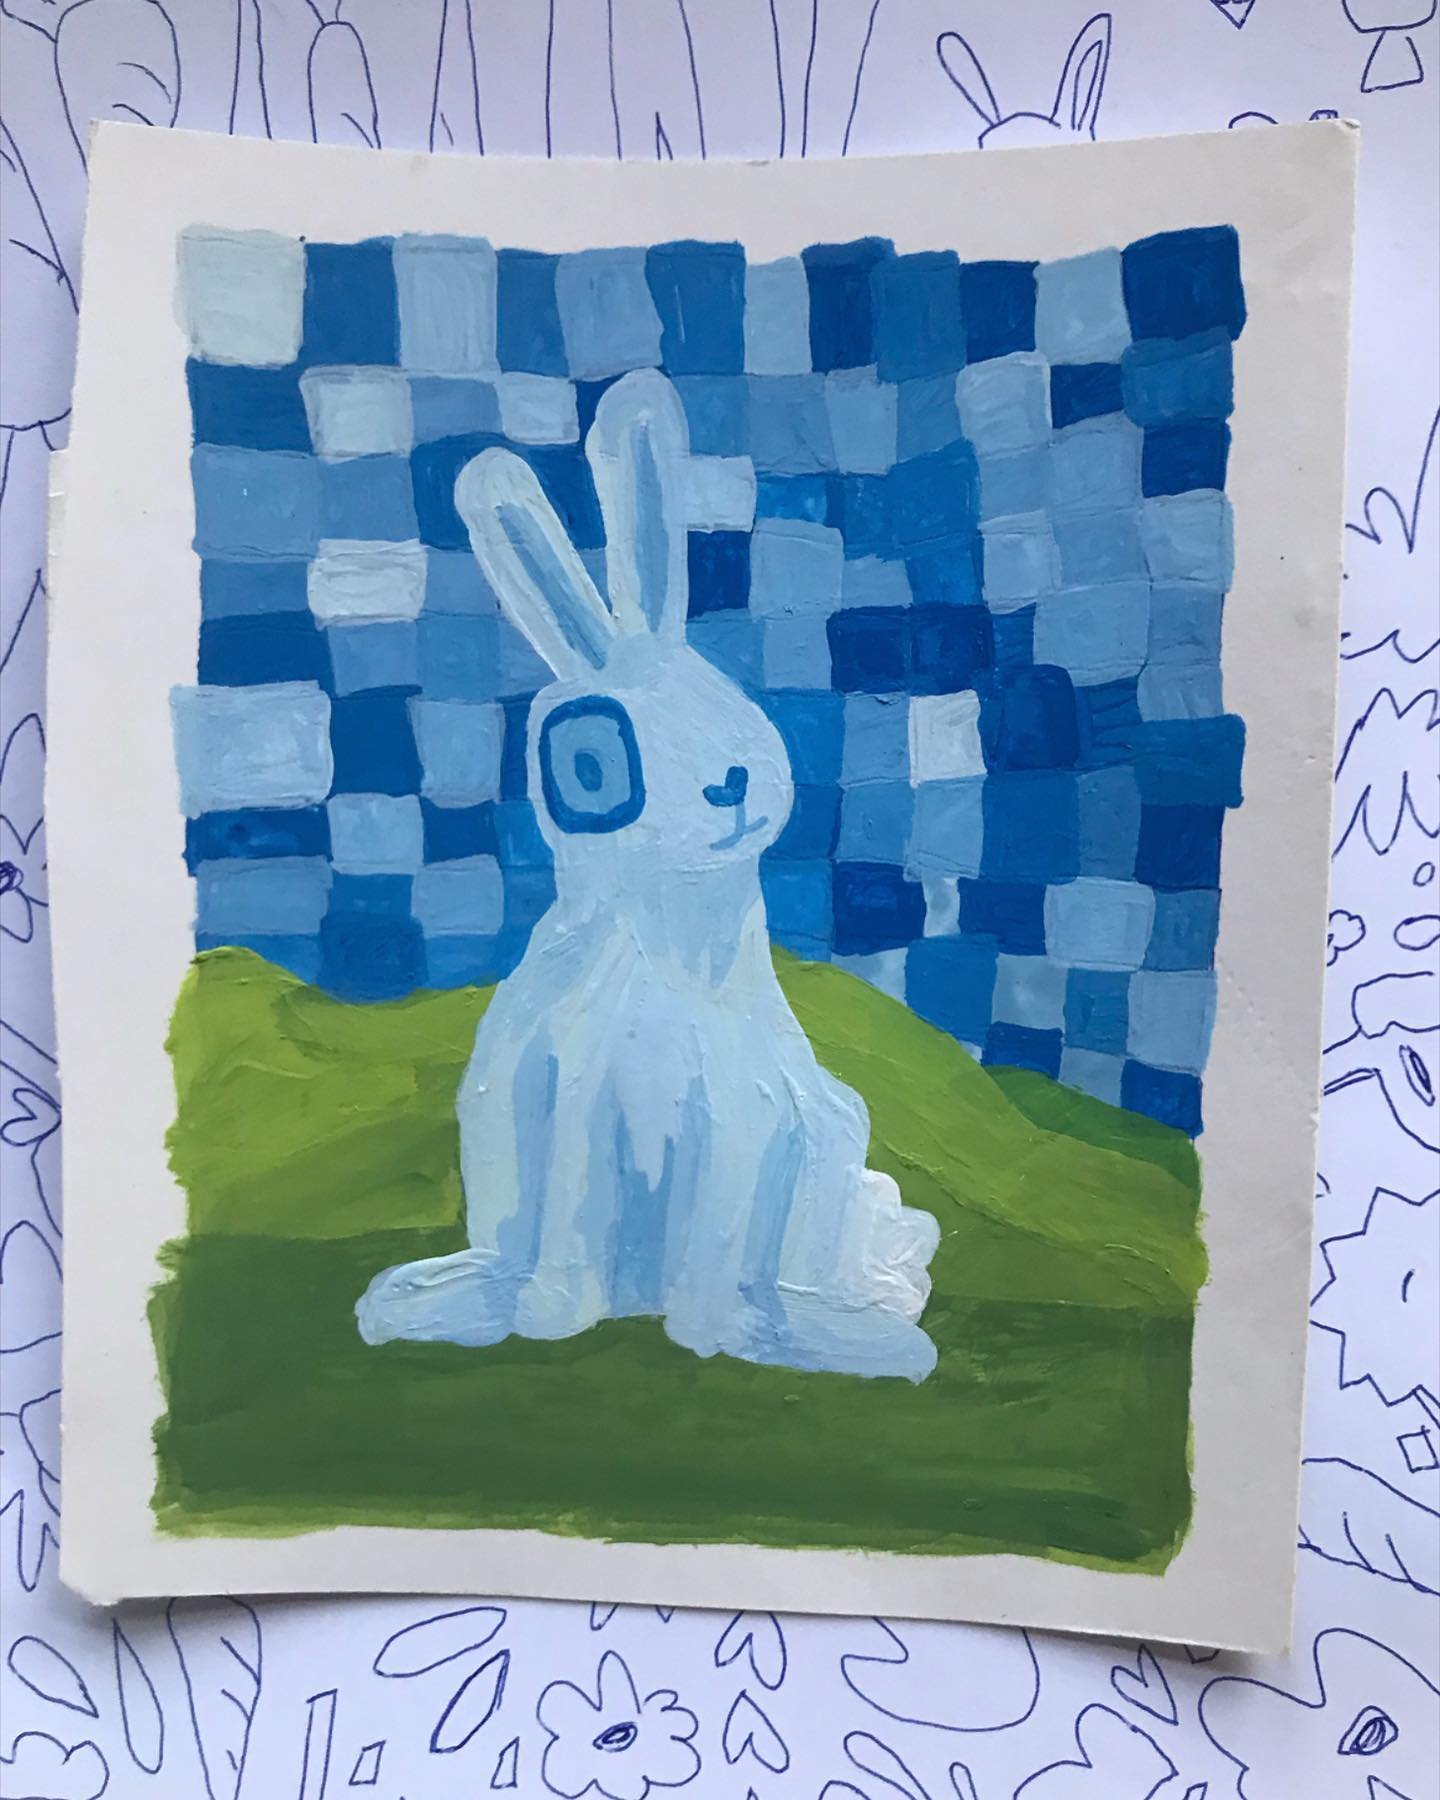 🐇🟦 A little blue bun bun for spring time 💙 a friend told me it reminded them of the old Windows background artwork. The rolling green grass hills. Anyone else remember that!? It must have been floating around my subconscious 🖼💻🌱#bunnyart #bluer